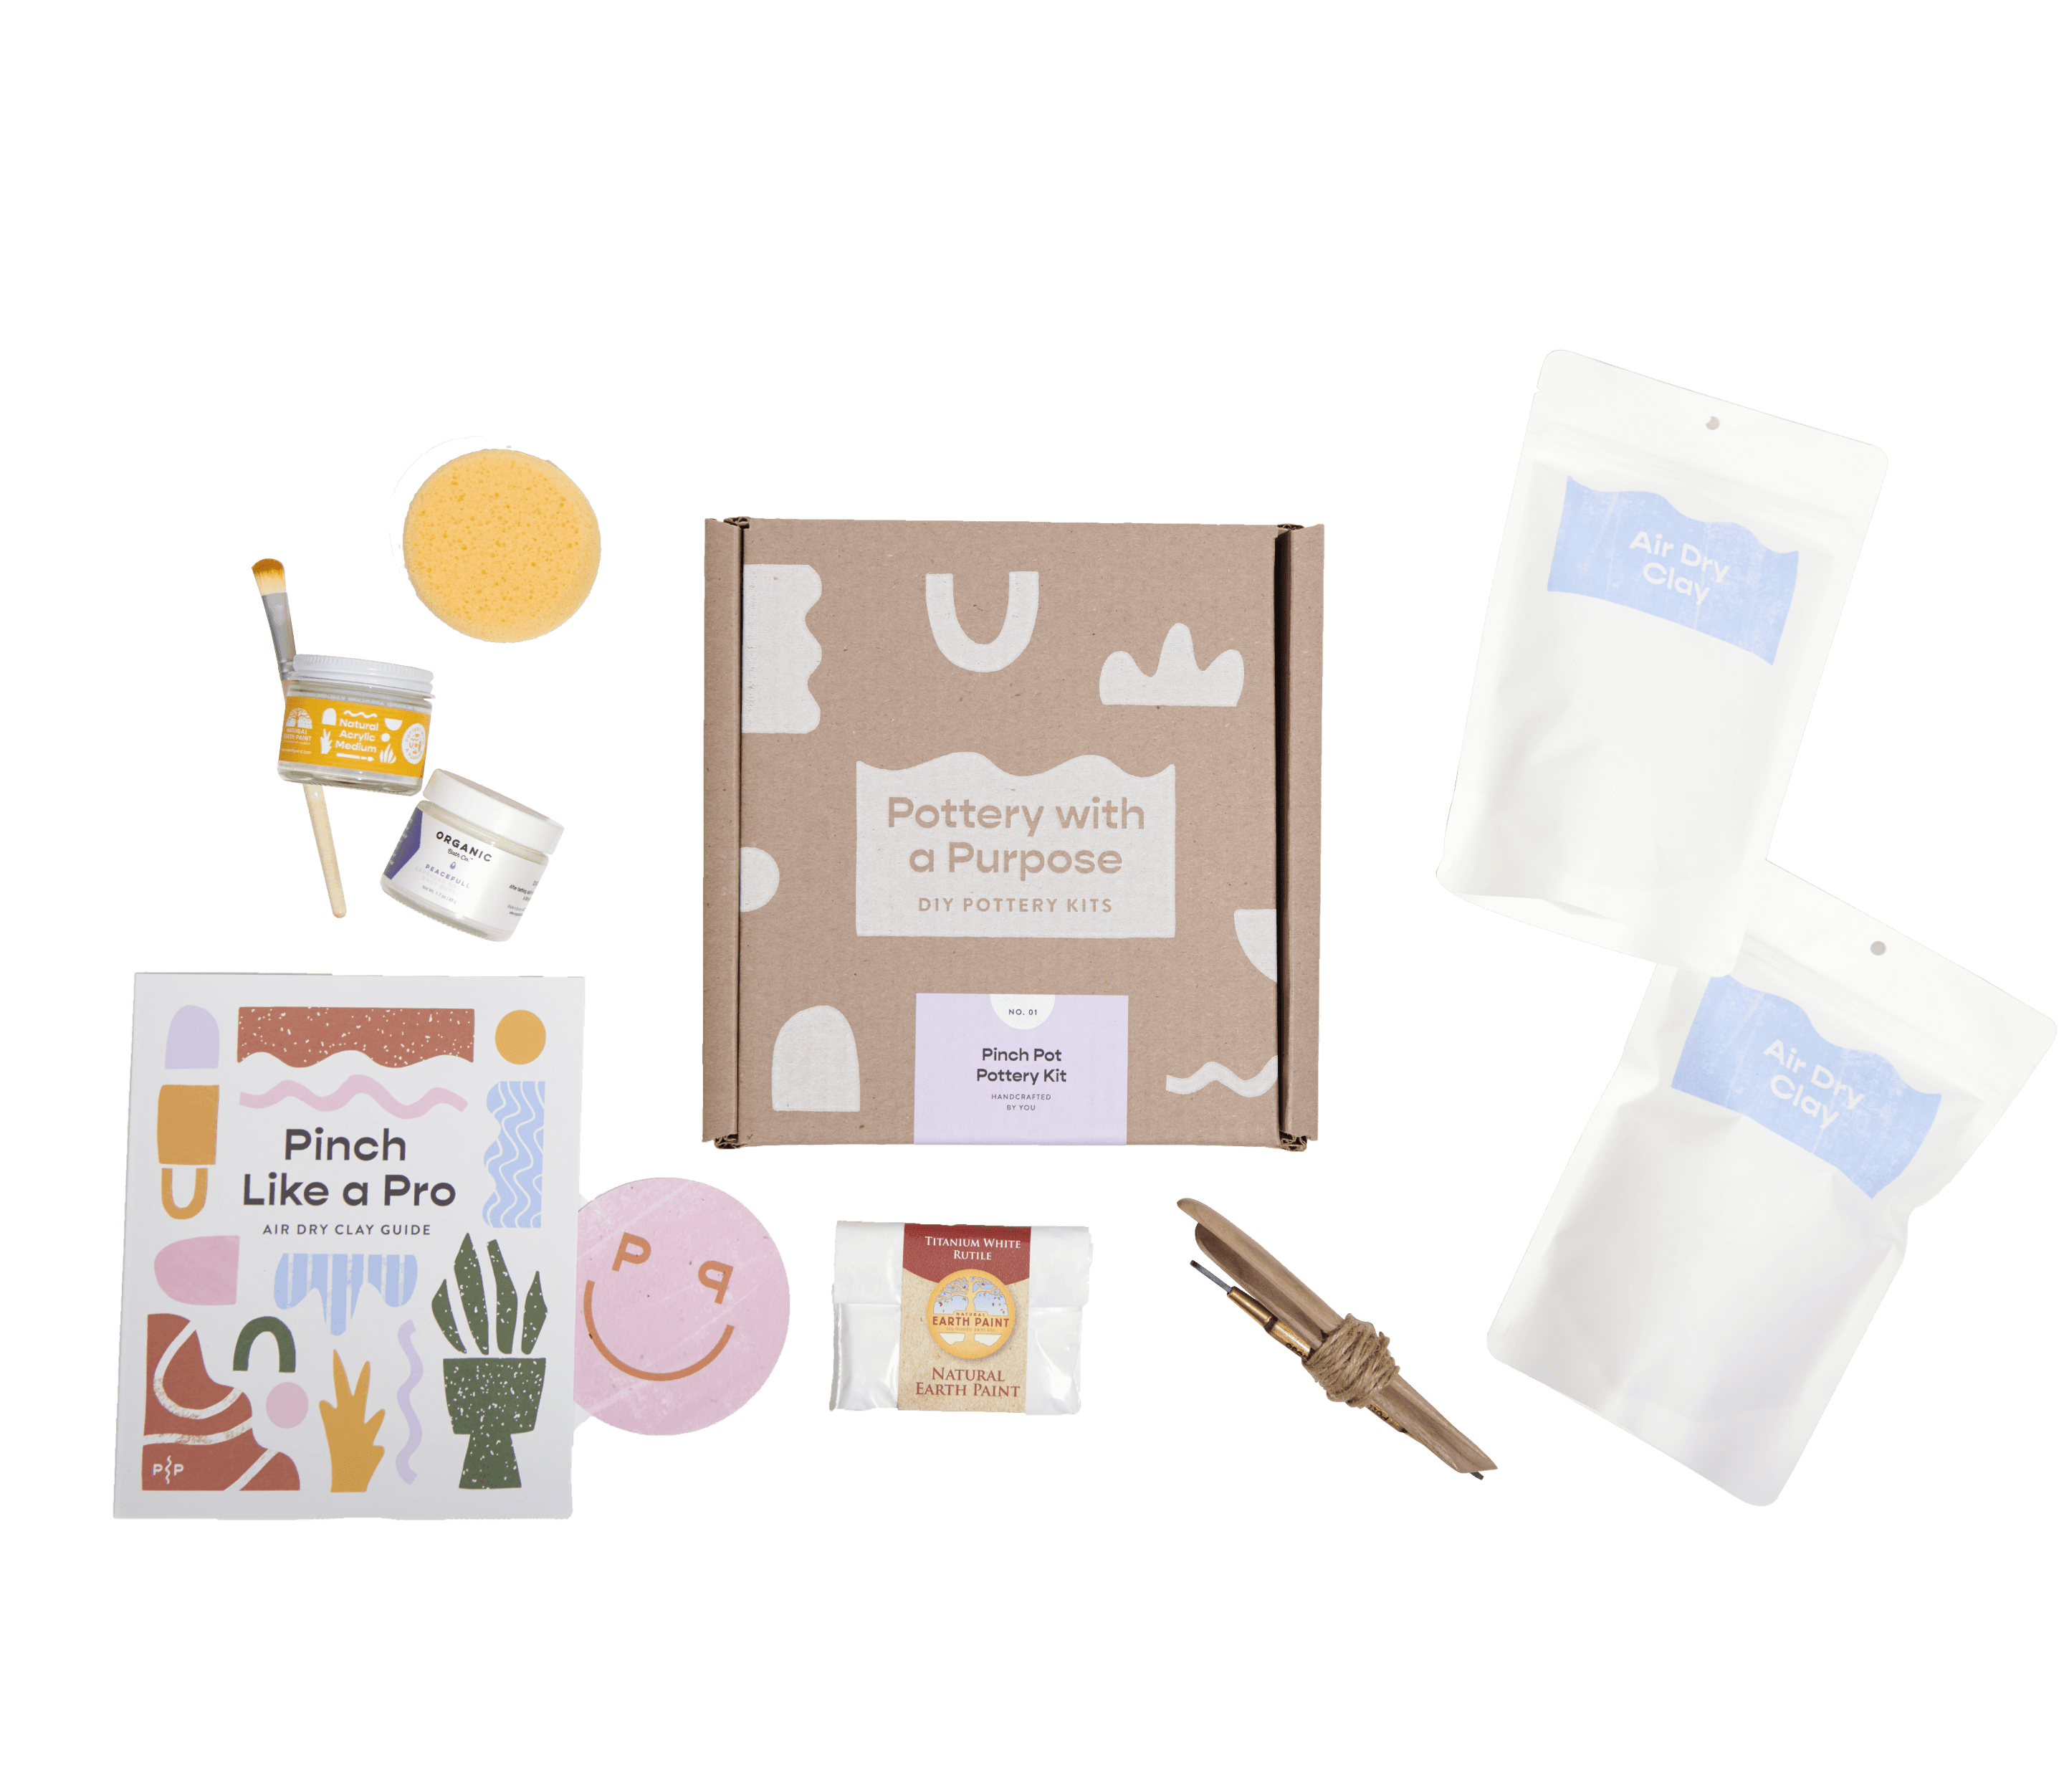  GGsimidale Pottery Kit Air-Dry Clay for Adults-Set Includes: Air-Dry  Clay for Adults,Tools,Pigment,Brushes, How-to-Guide,Regular Paint,Pigment  Tray : Arts, Crafts & Sewing